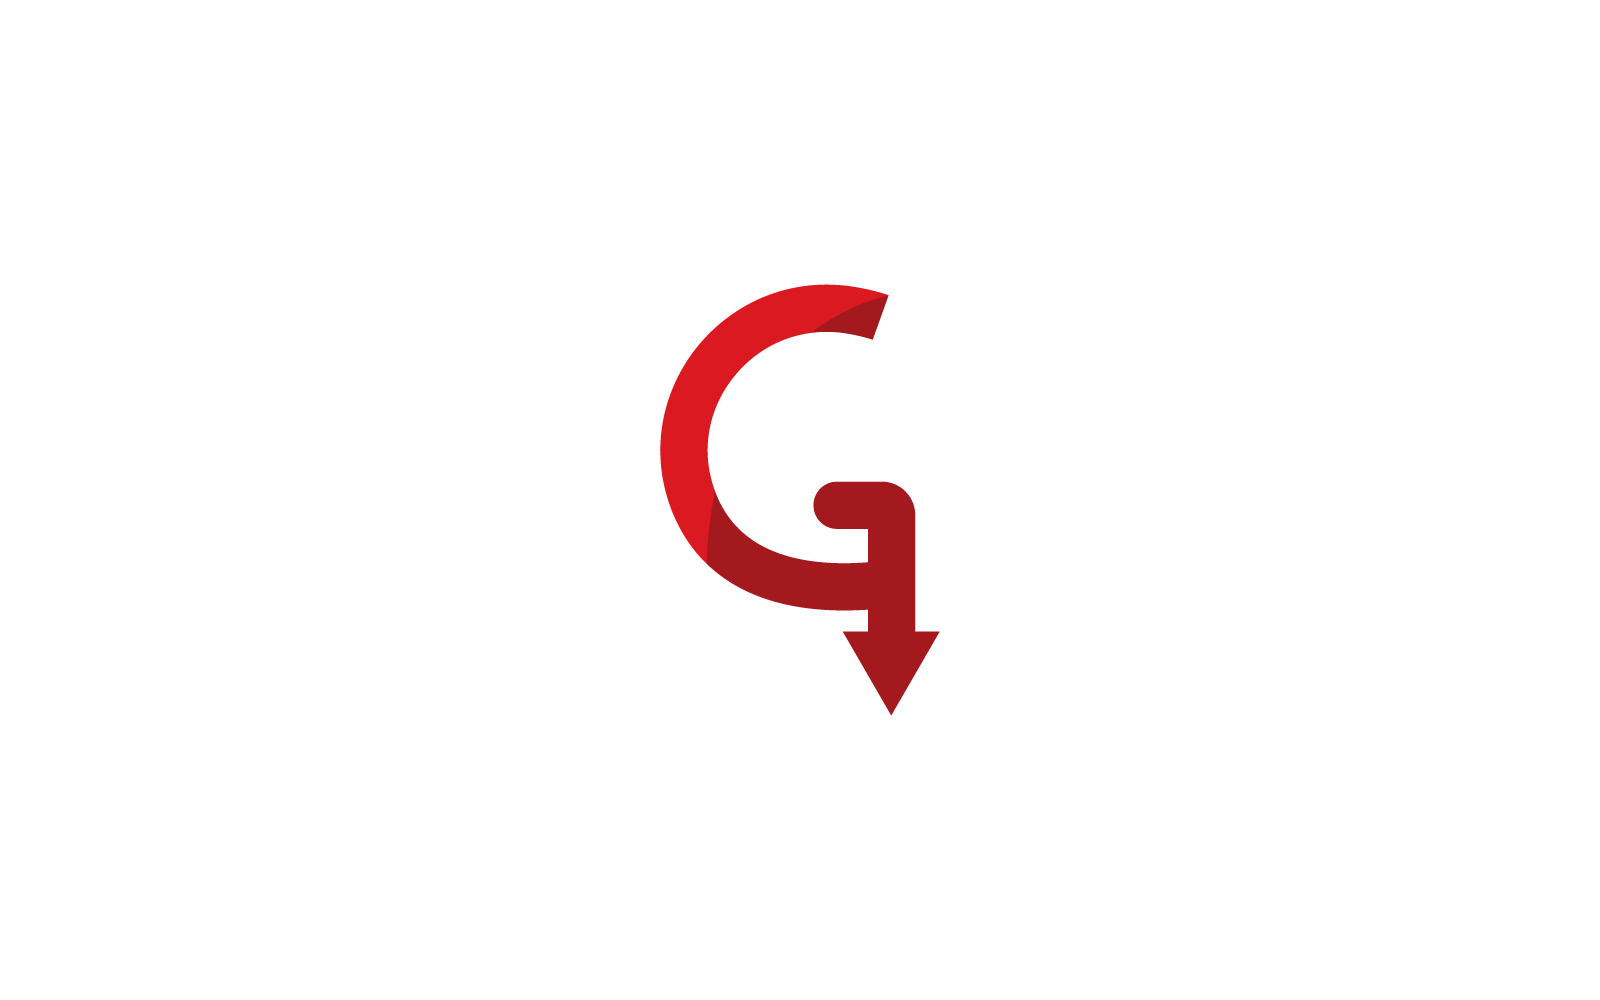 G Initial letter with arrow design illustration